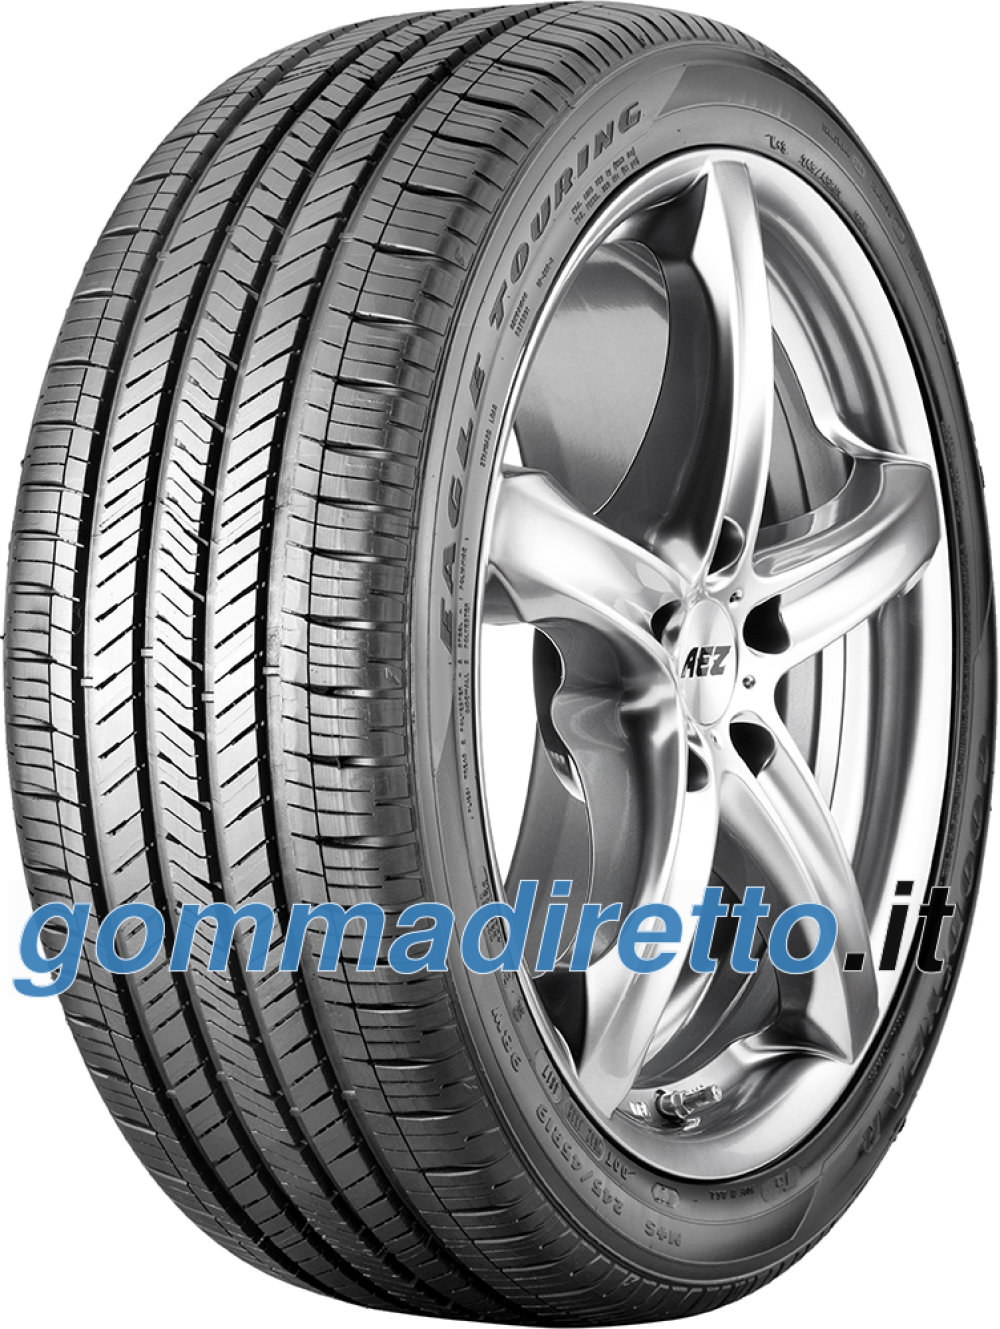 Image of Goodyear Eagle Touring ( 255/45 R20 105W XL EDR, MGT )